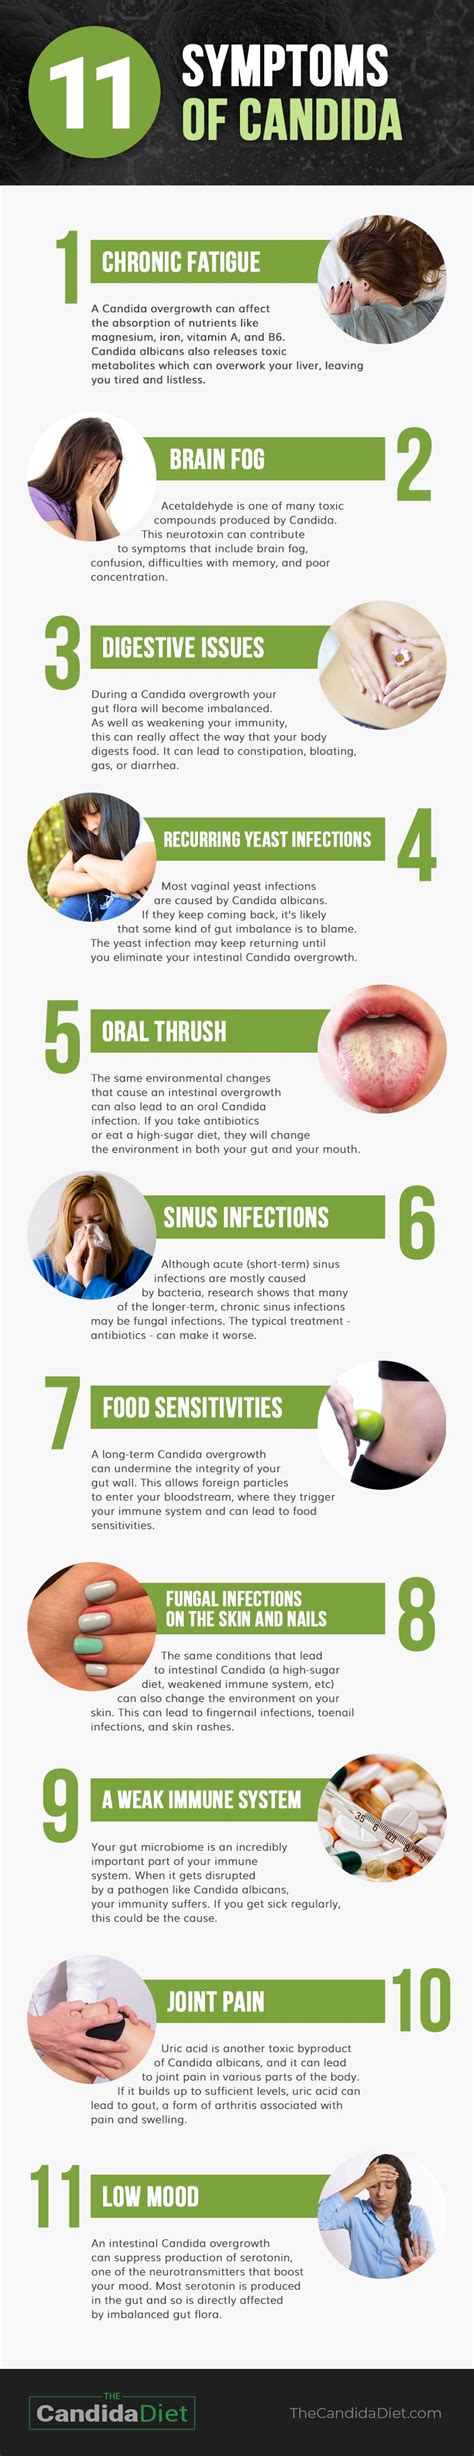 11 Symptoms Of Candida Overgrowth Plus How To Treat It